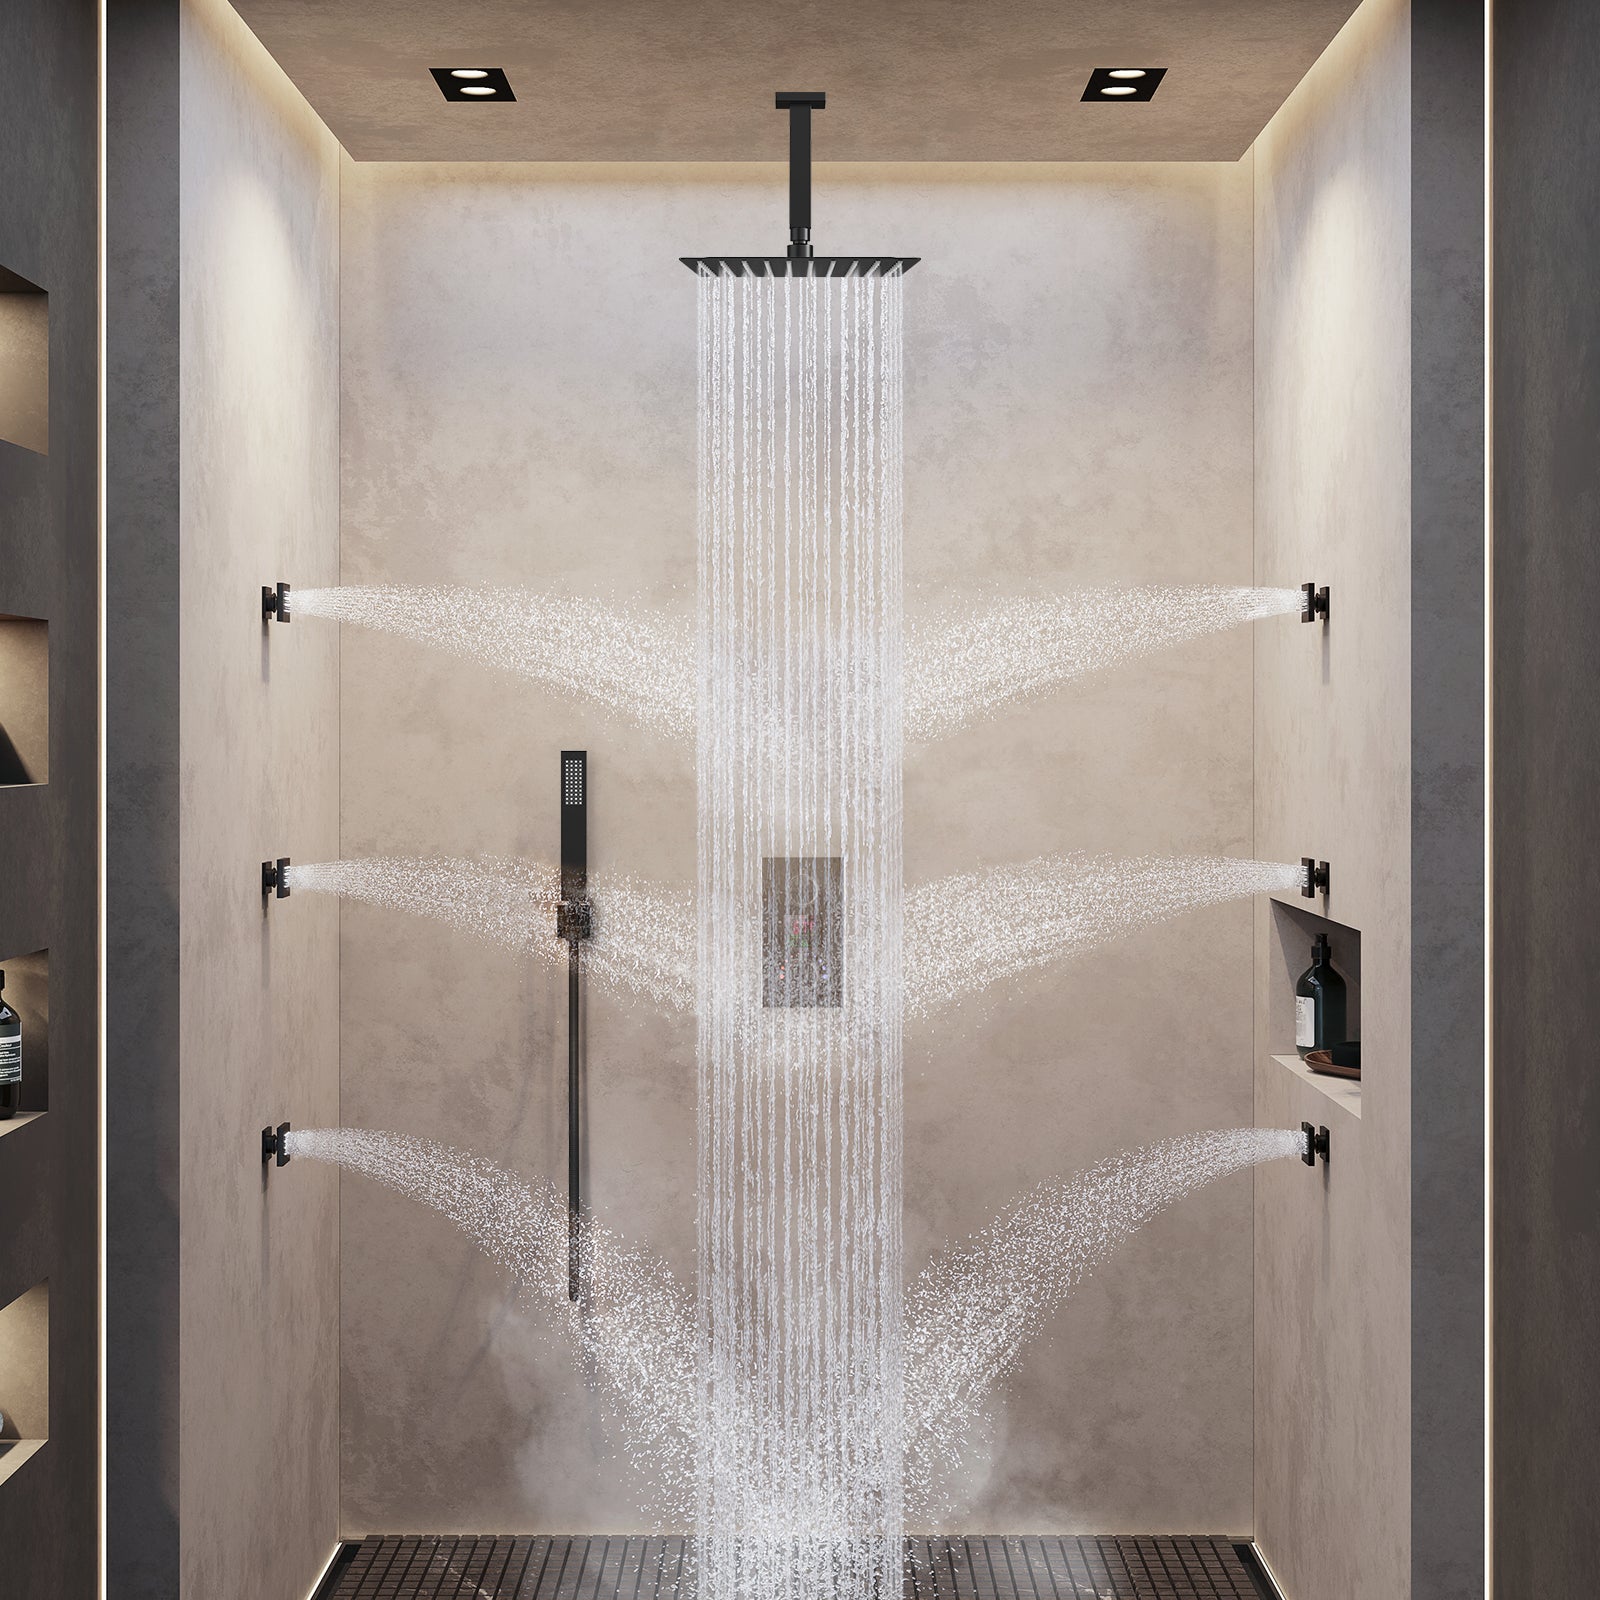 SFS-1015-BK12 EVERSTEIN Ceiling installation Constant Temperature Shower Faucet with LED Display Rain Shower System, with 6 Massage Nozzles and Hand-held Spray,Matte Black